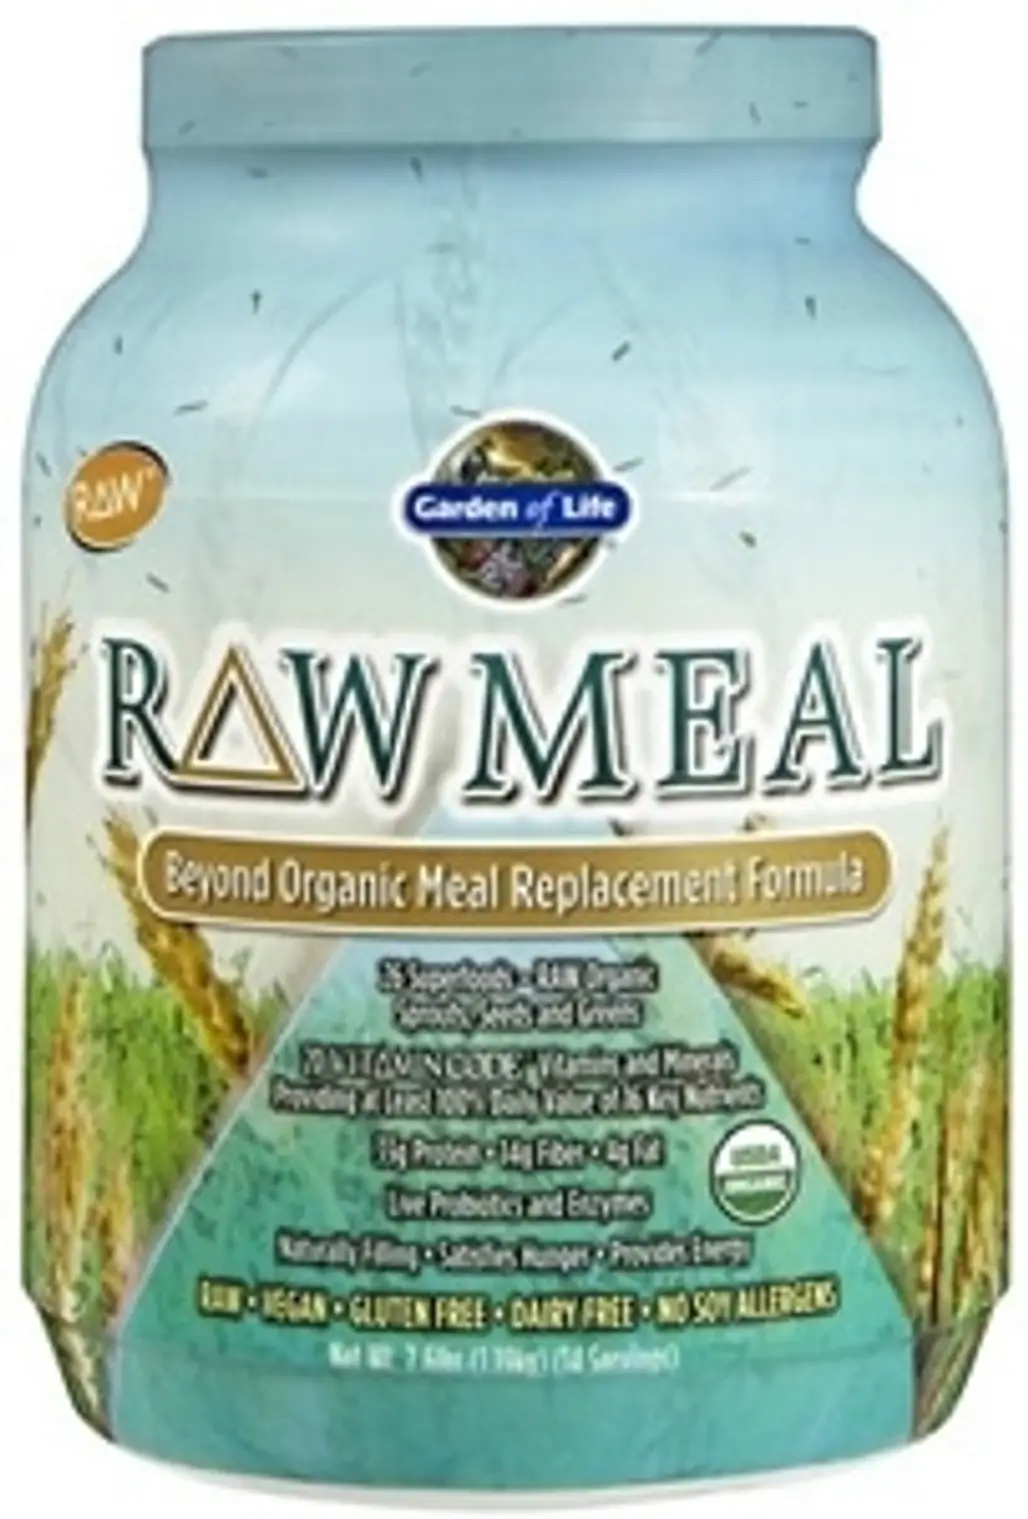 Garden of Life RAW Meal Replacement Powder